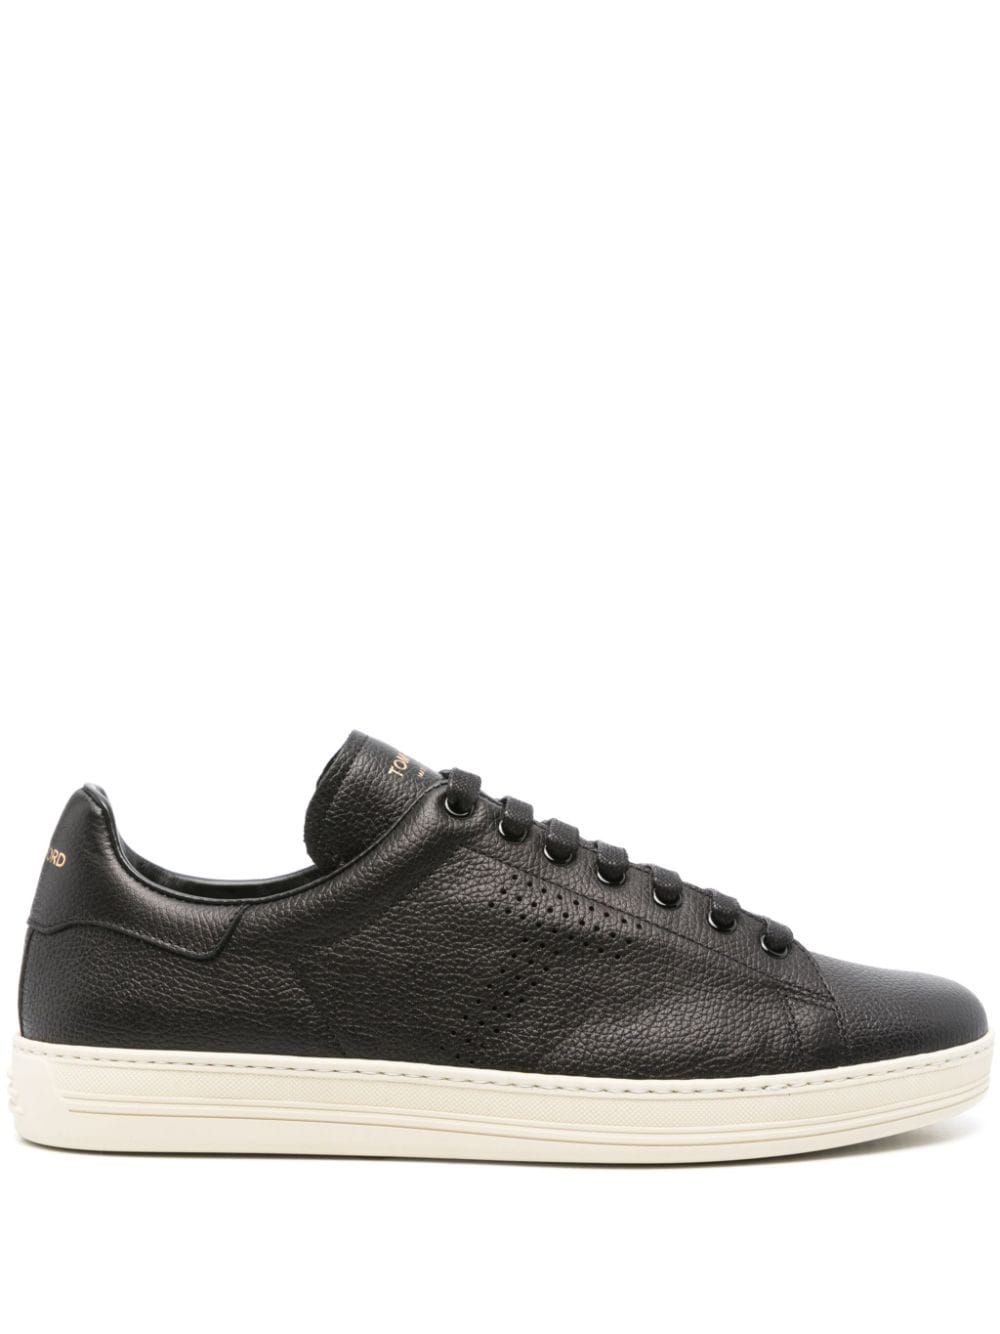 TOM FORD Warwick leather sneakers Black